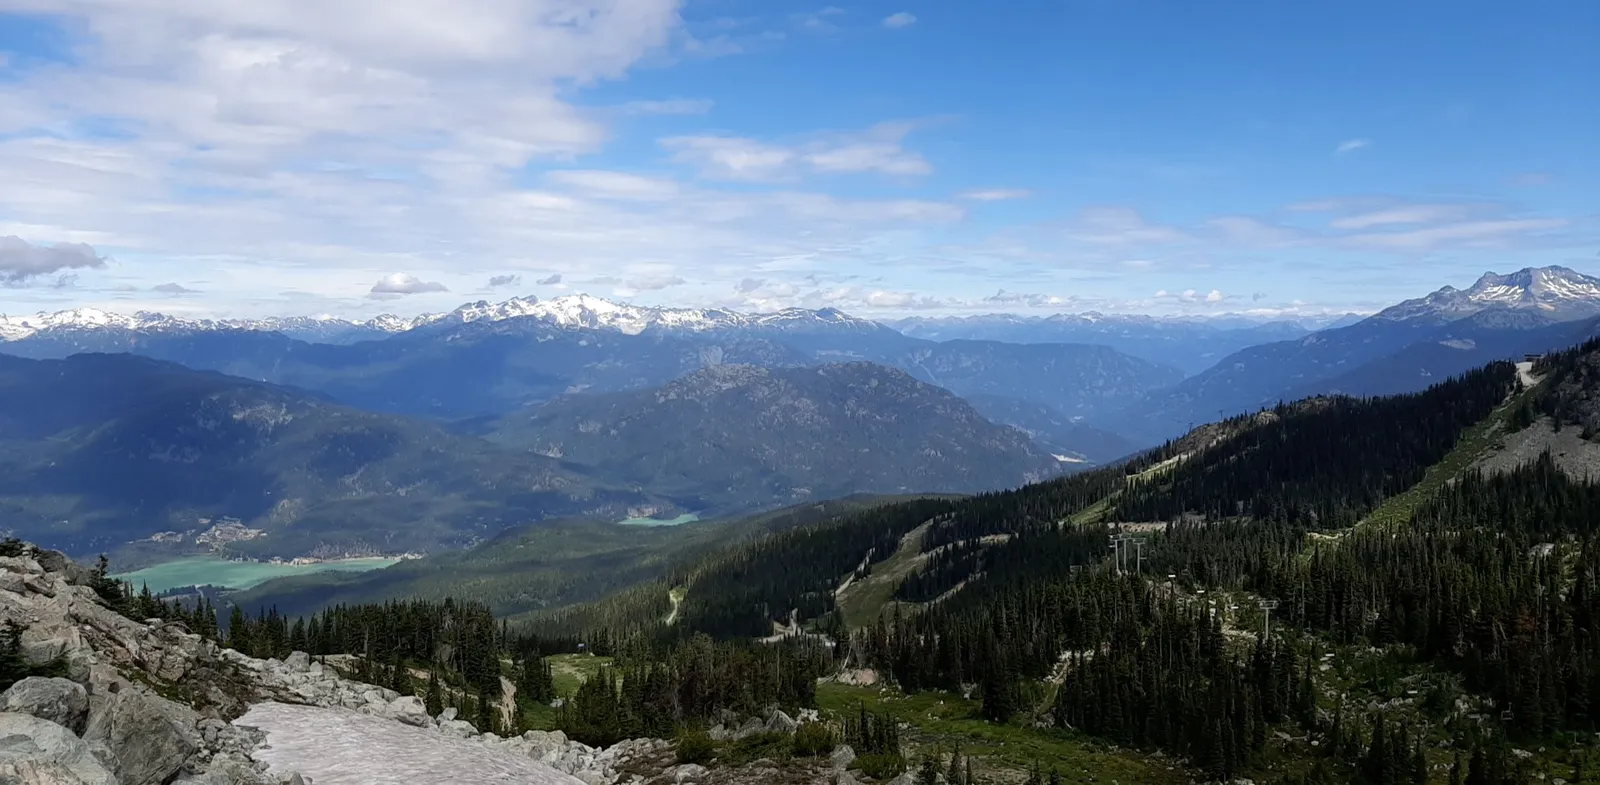 From the top of the Whistler mountain to highlight our commitment to sustainability